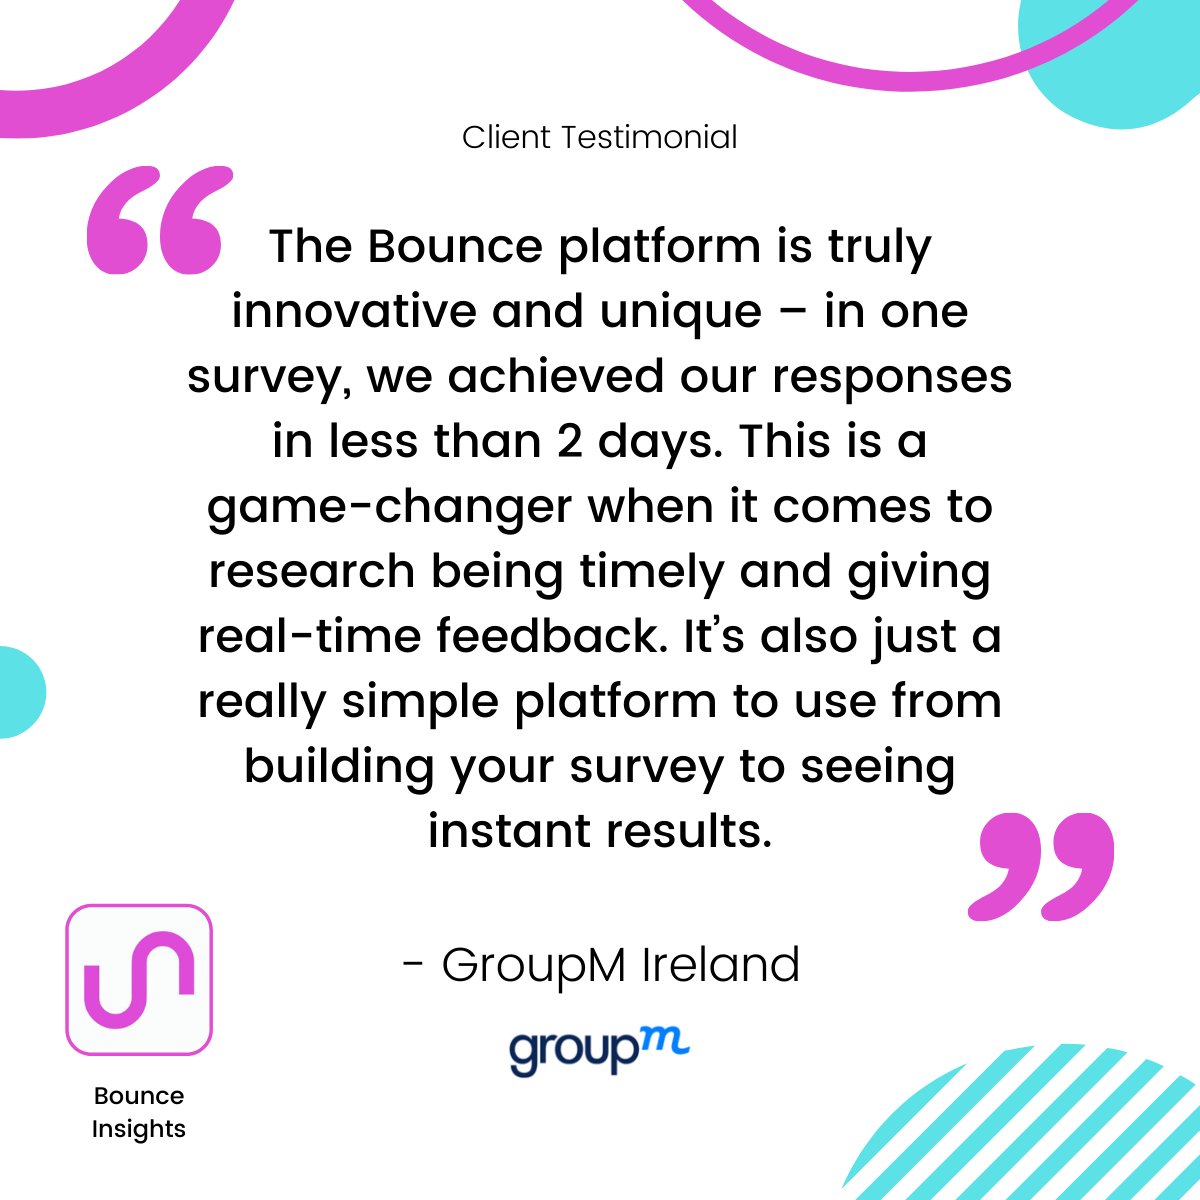 Client #Testimonial 'This is a game-changer when it comes to research being timely and giving real-time feedback.' - Eimear McGrath, Research Director, GroupM Ireland #Insights #MarketResearch #HappyCustomers #Innovation